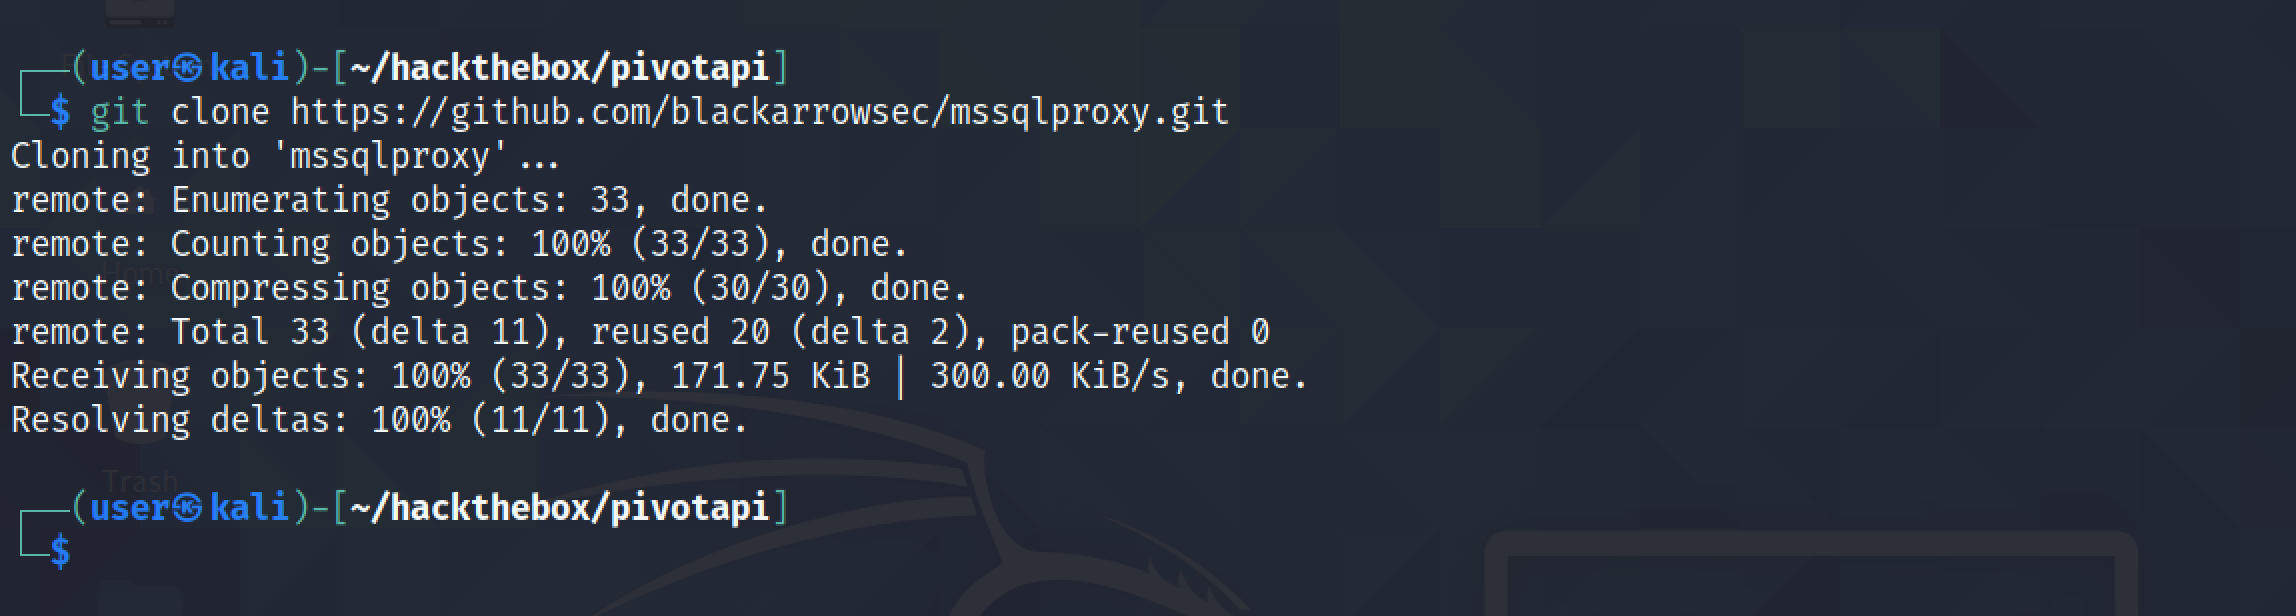 Cloning the mssqlproxy repo from GitHub.